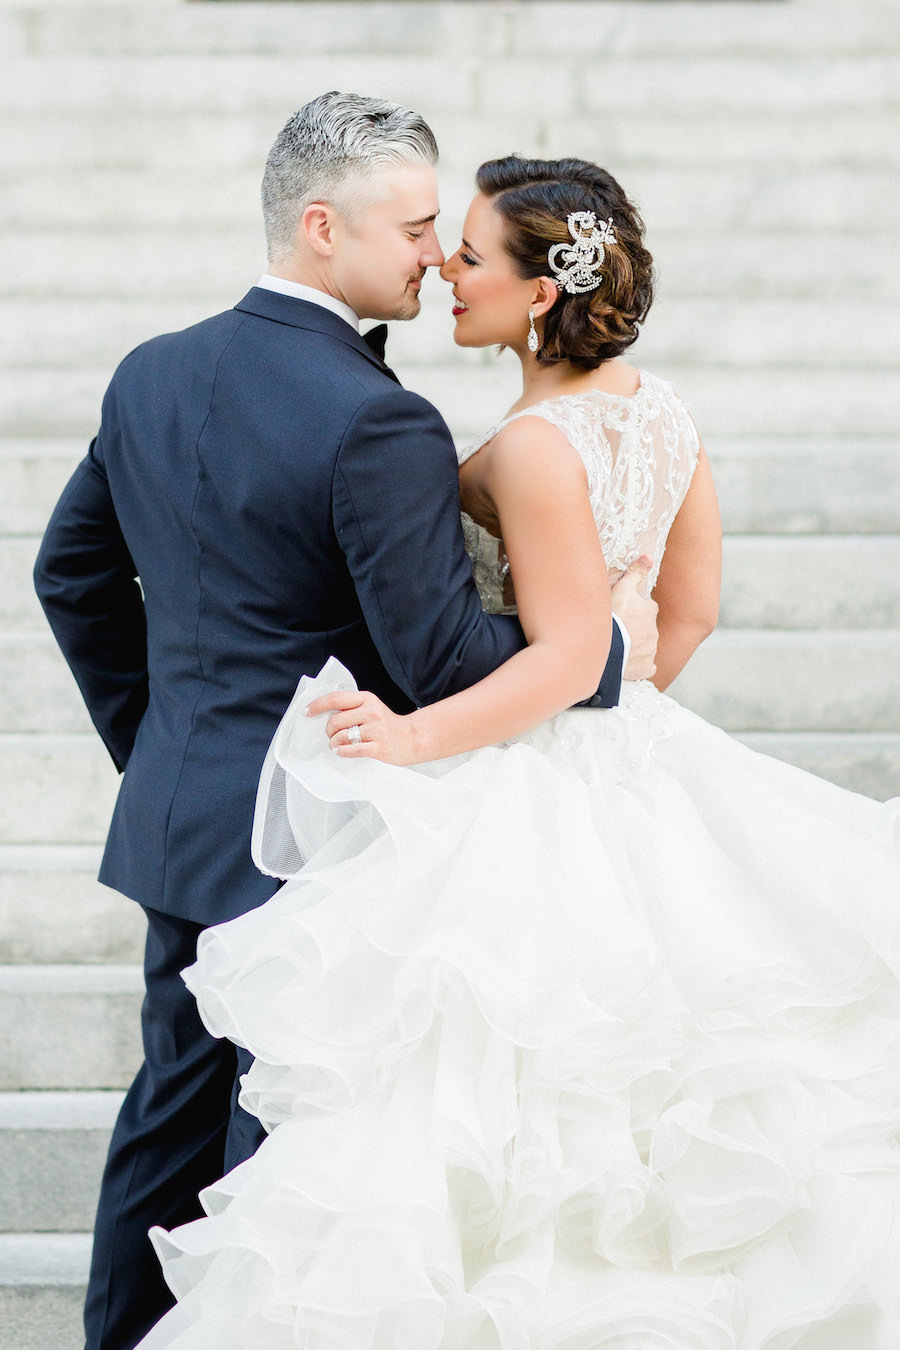 Tampa Bride and Groom Wedding Portrait in Ivory Mermaid Ines DiSanto Wedding Dress from Isabel O’Neil Bridal | Liana Fuente Wedding Portrait | Tampa Wedding Photographer Ailyn La Torre Photography